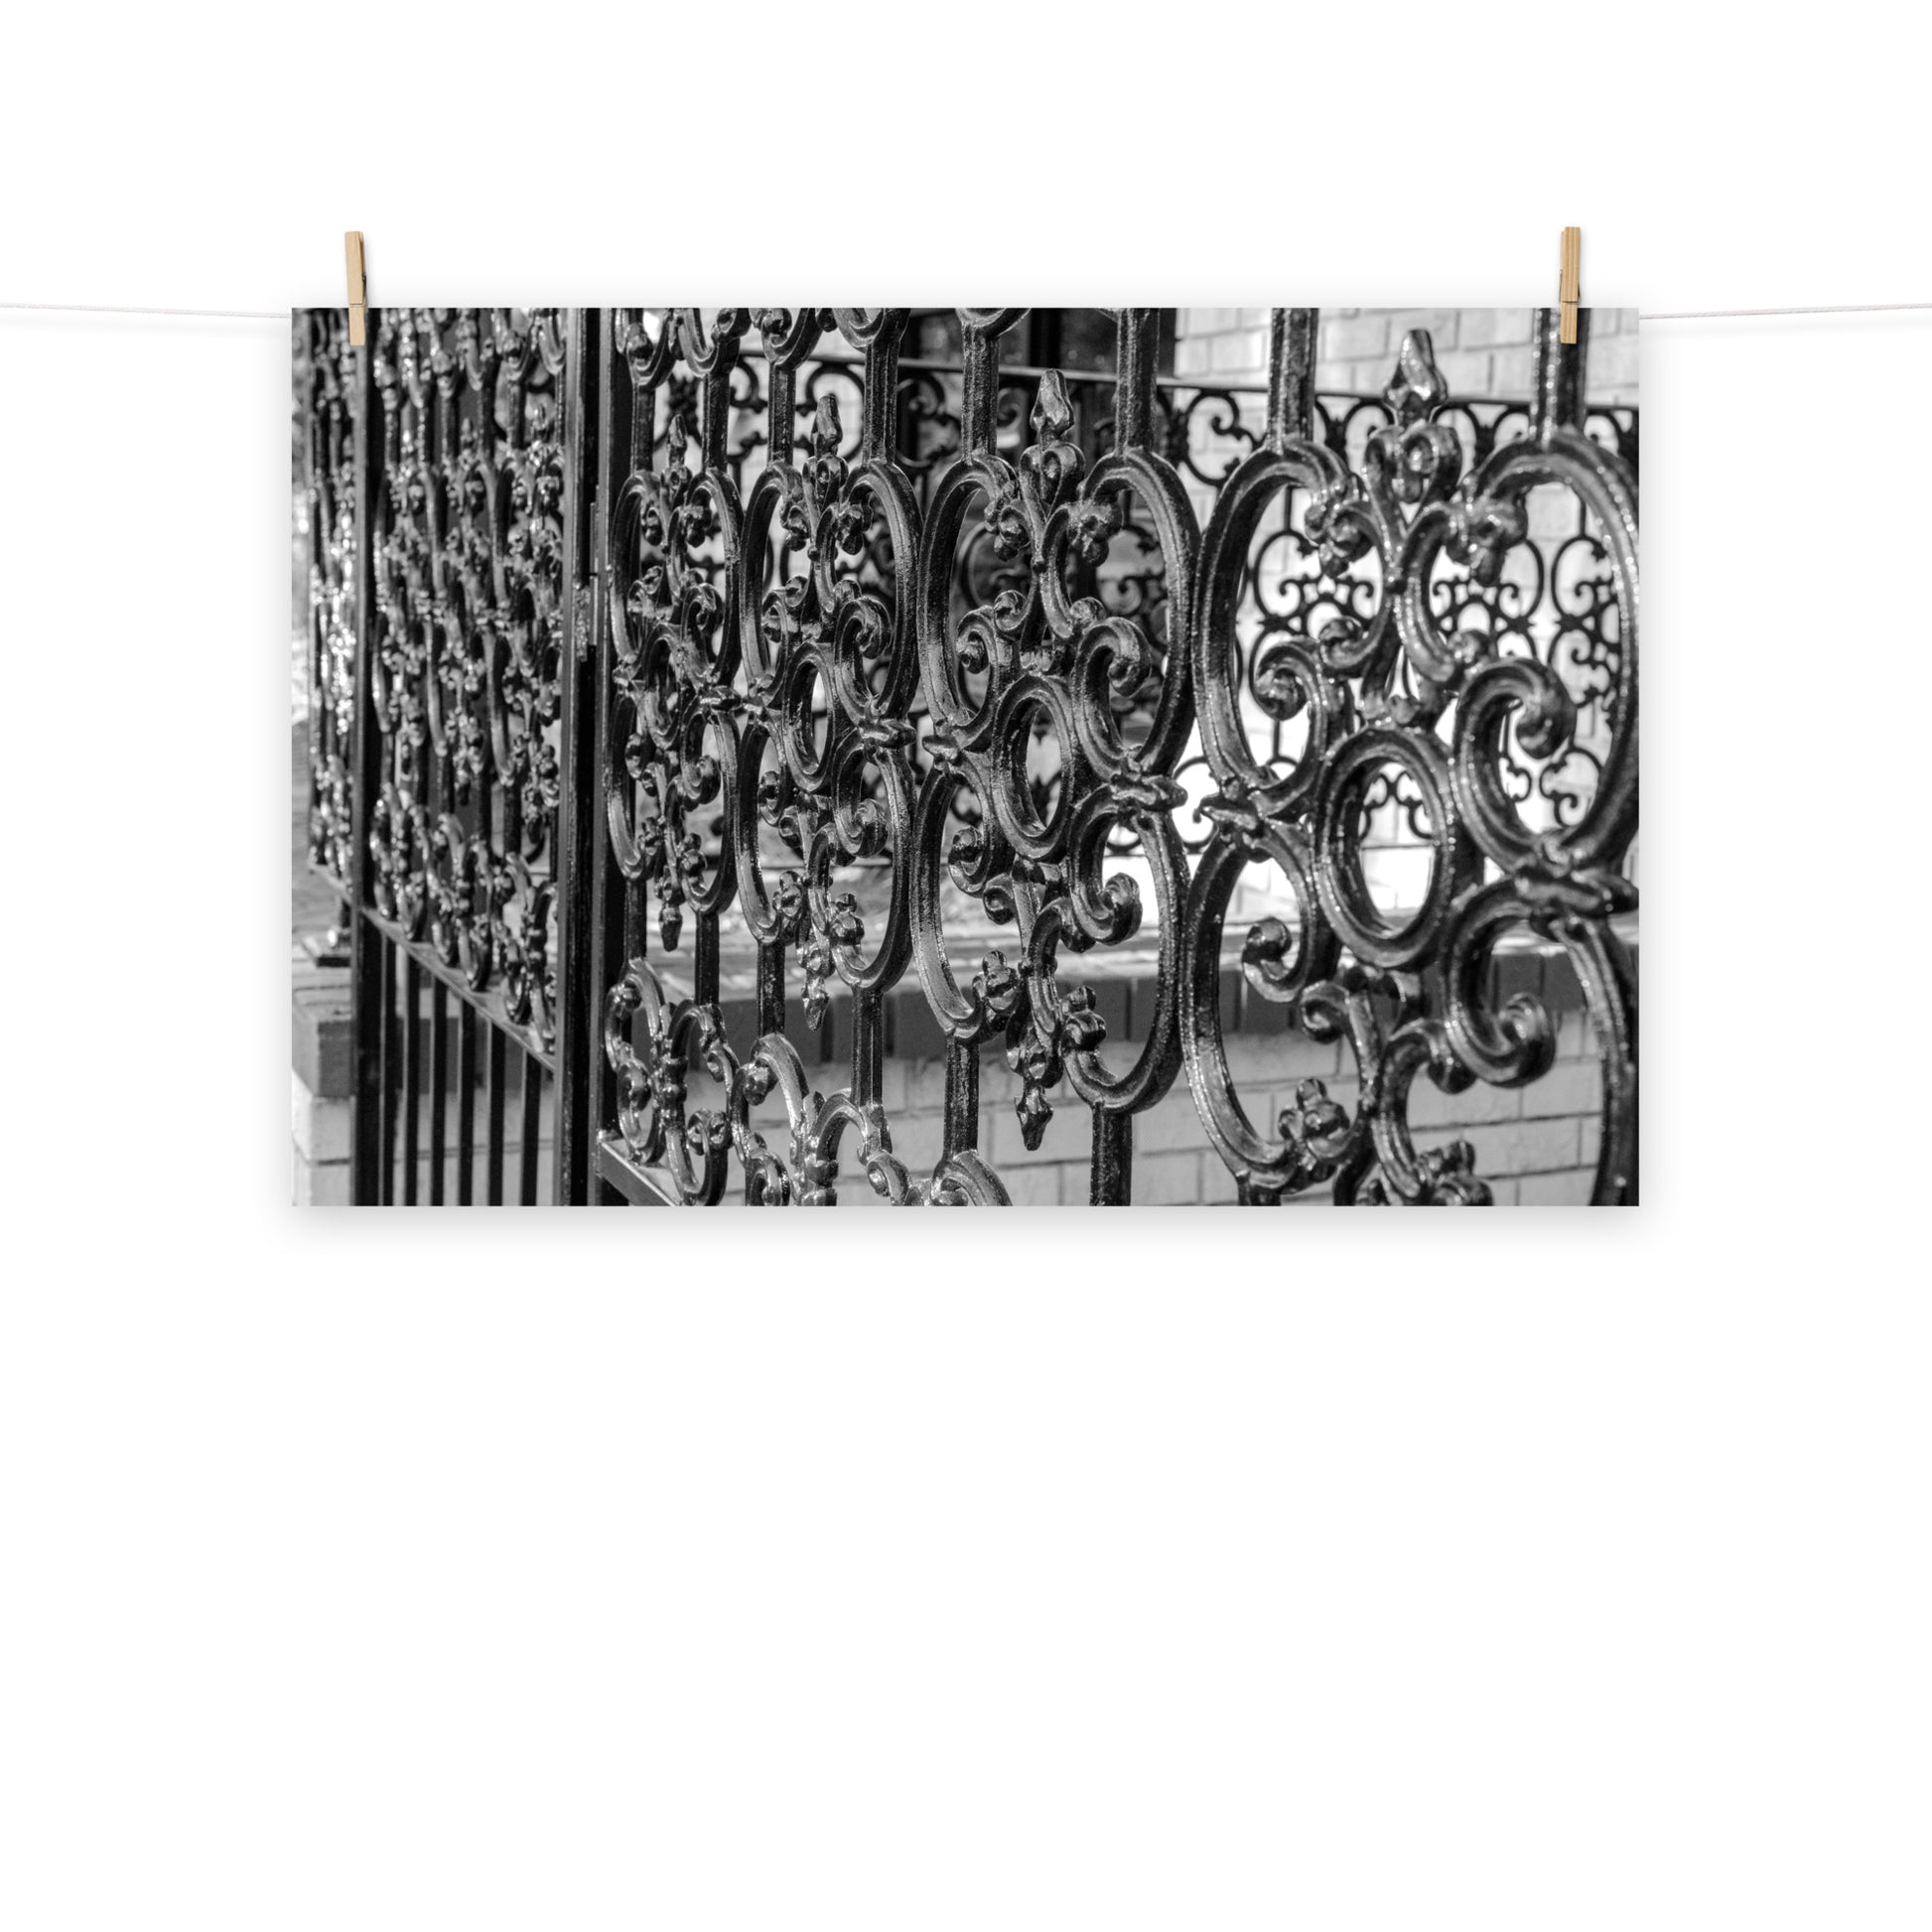 Architectural / Industrial / Cityscape Abstract Decor Black and White Old Wrought Iron Fence Savannah Ga Loose Wall Art Print 8" x 10"